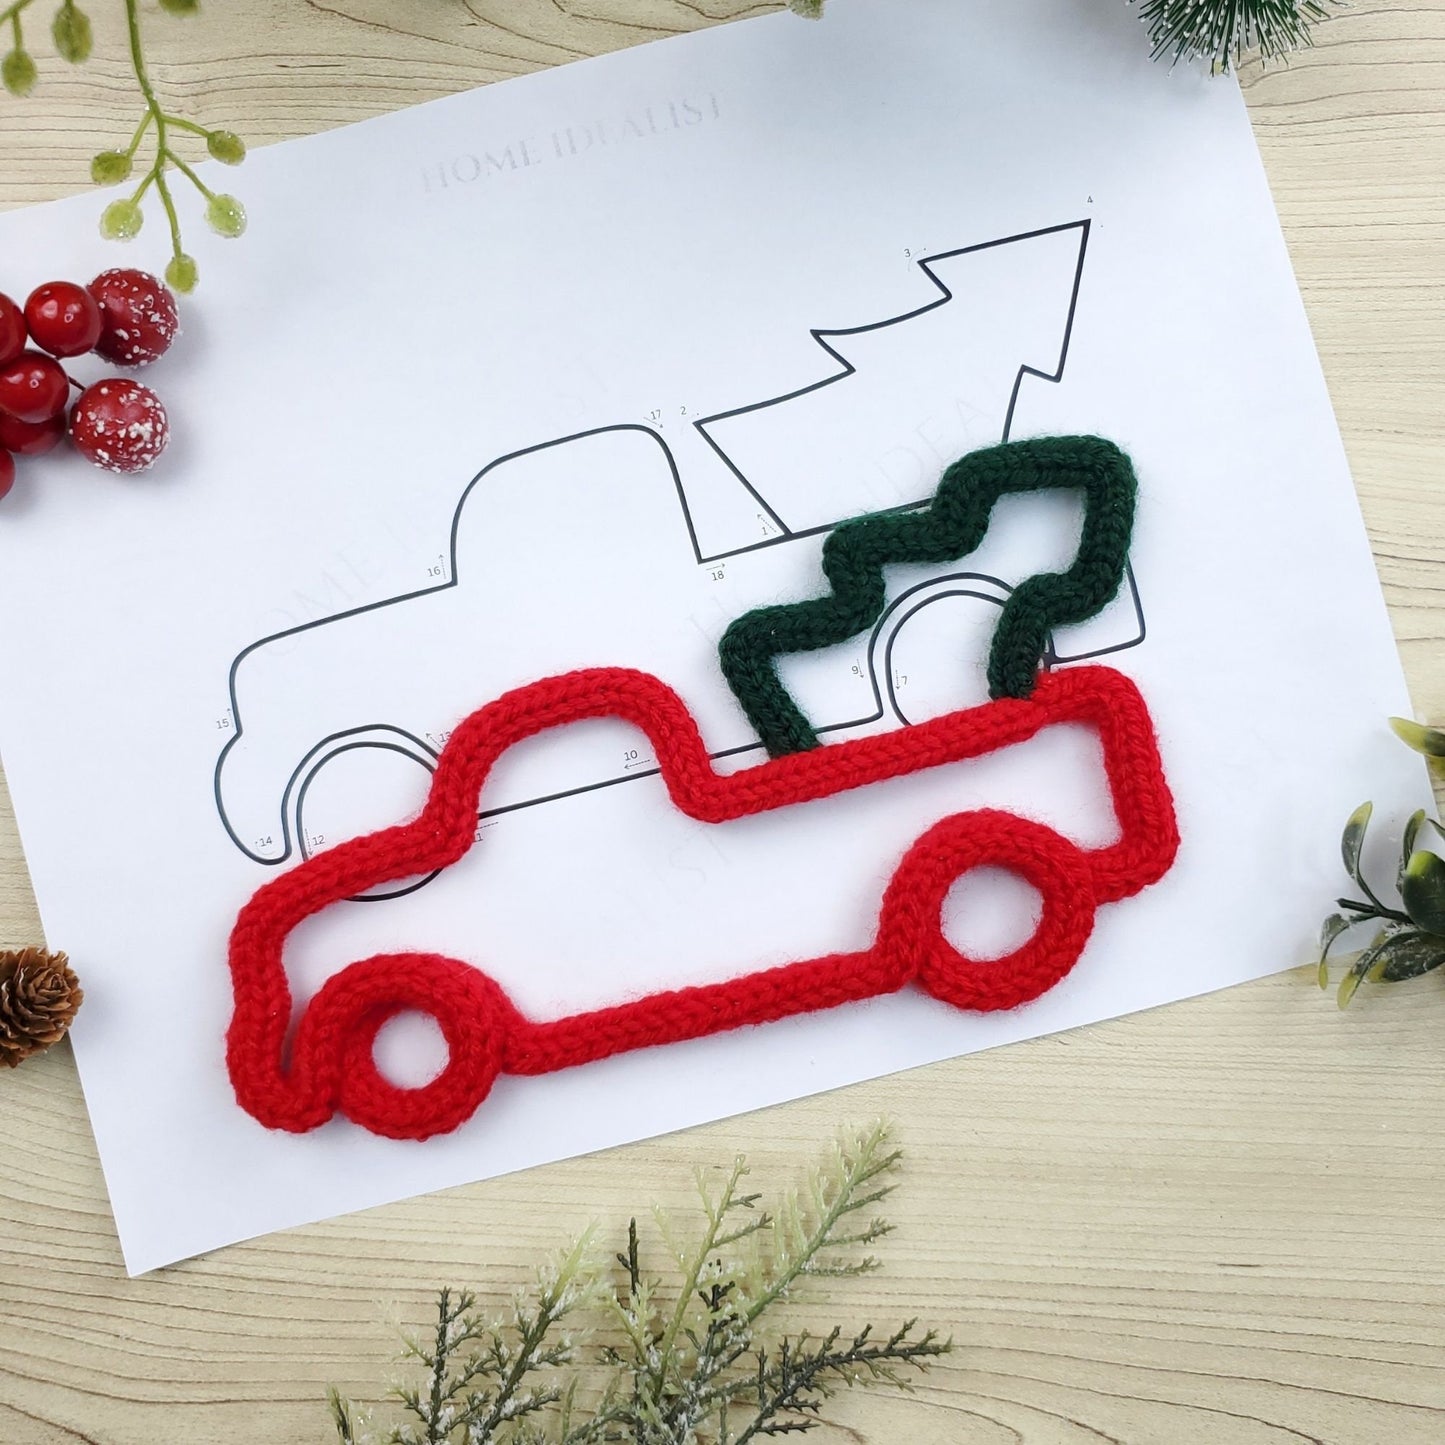 35 Christmas Wire Art Figure Templates - Initial Letter Templates